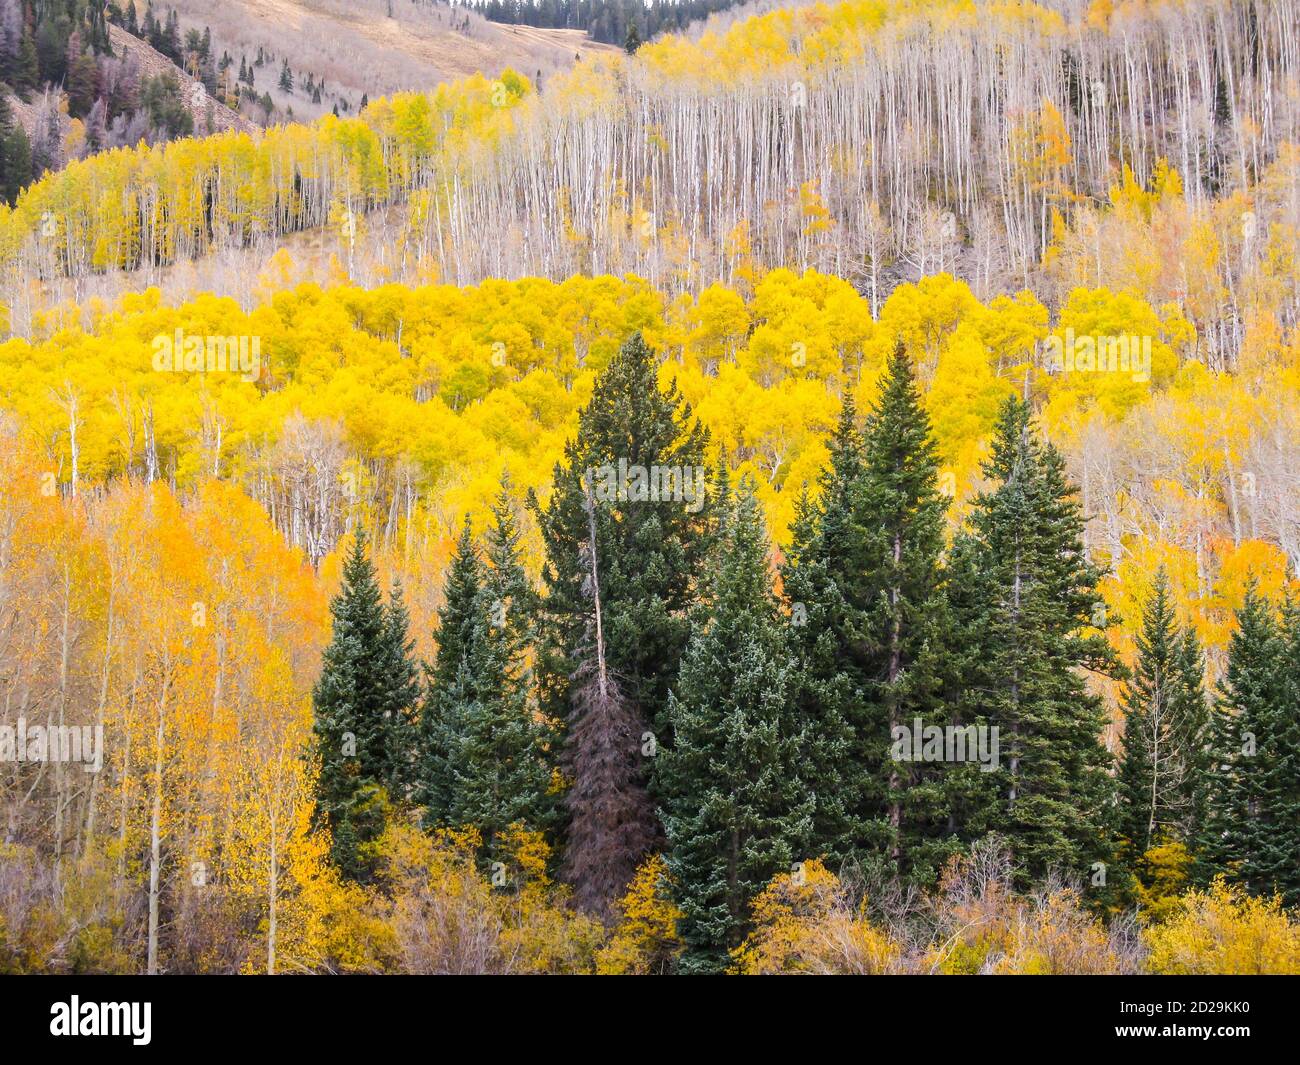 The slopes of the La Sal Mountains of Utah, USA, coverd in fall forests of yellow colored quaking aspen, and evergreen, Douglas-firs, Stock Photo